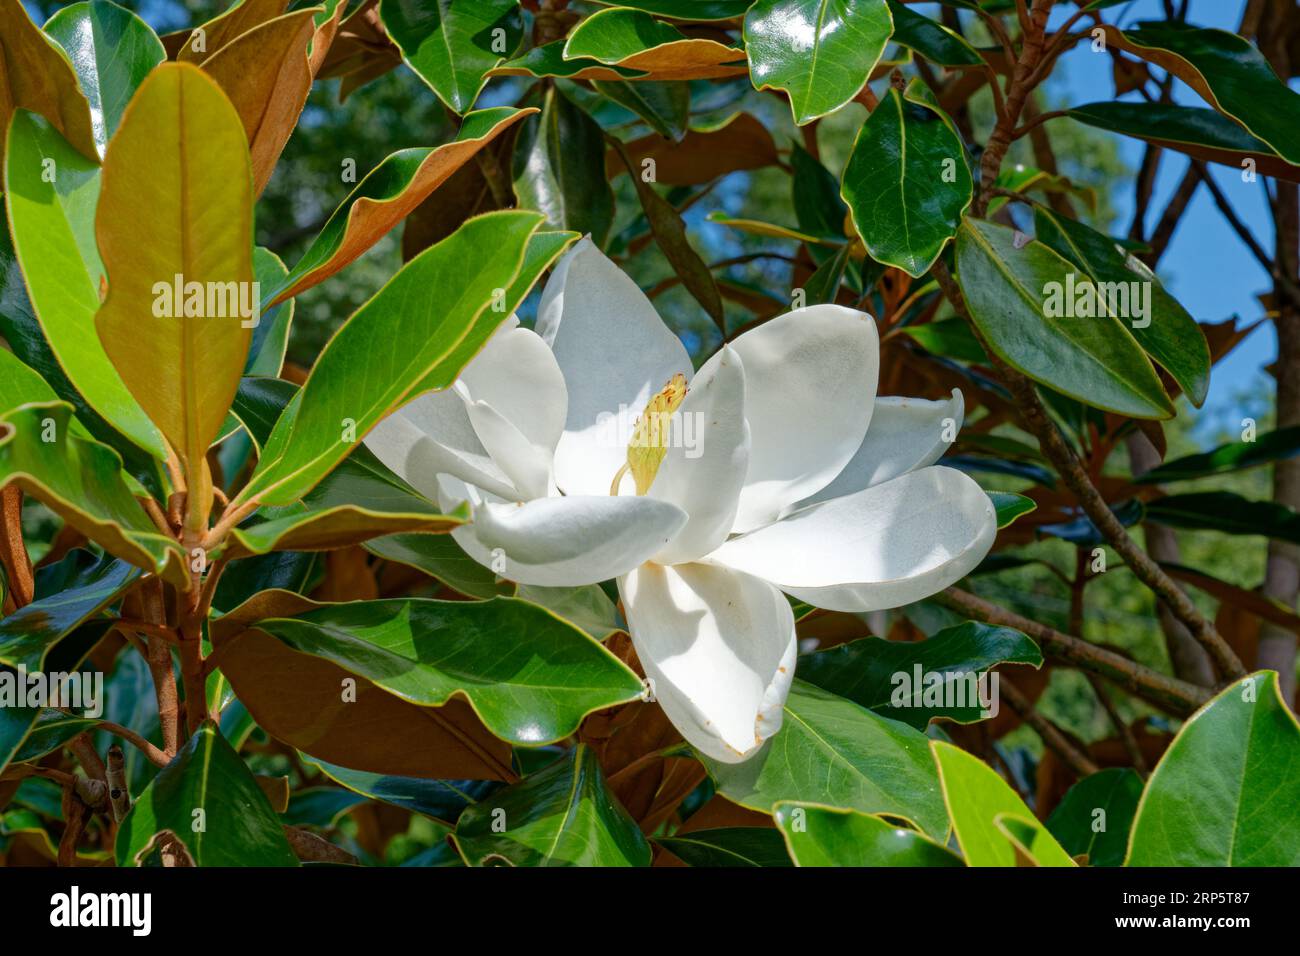 A southern magnolia tree with a white flower in full bloom with a seed pod forming in the middle of the petals surrounded by the large green foliage c Stock Photo